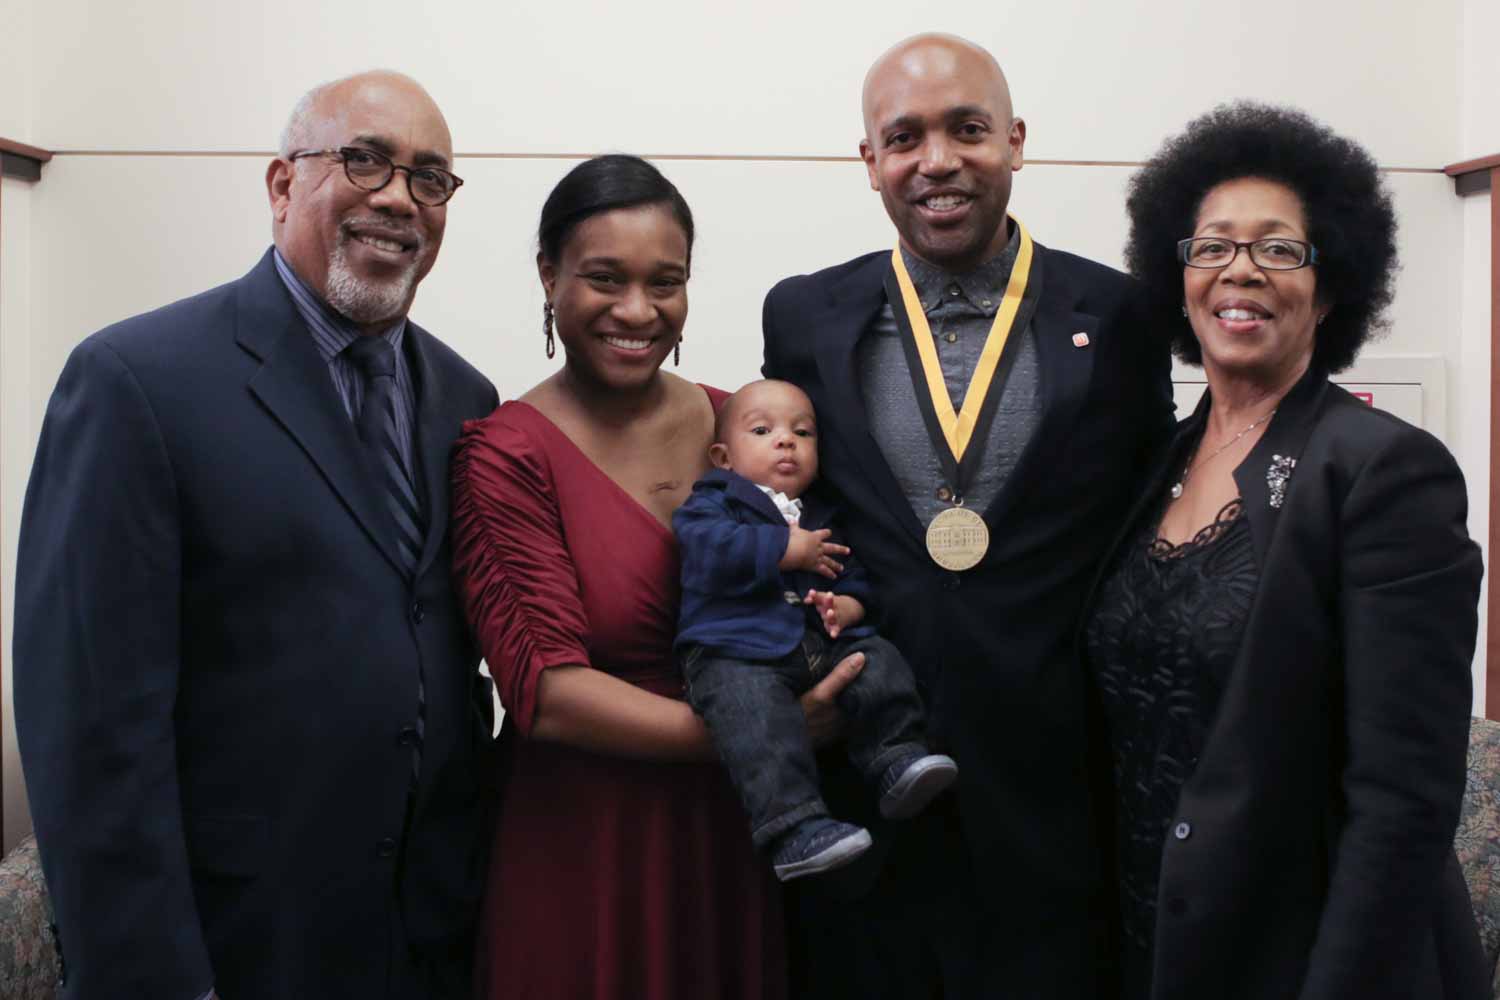 Lincoln Stephens poses for a portrait with his wife, parents and baby.